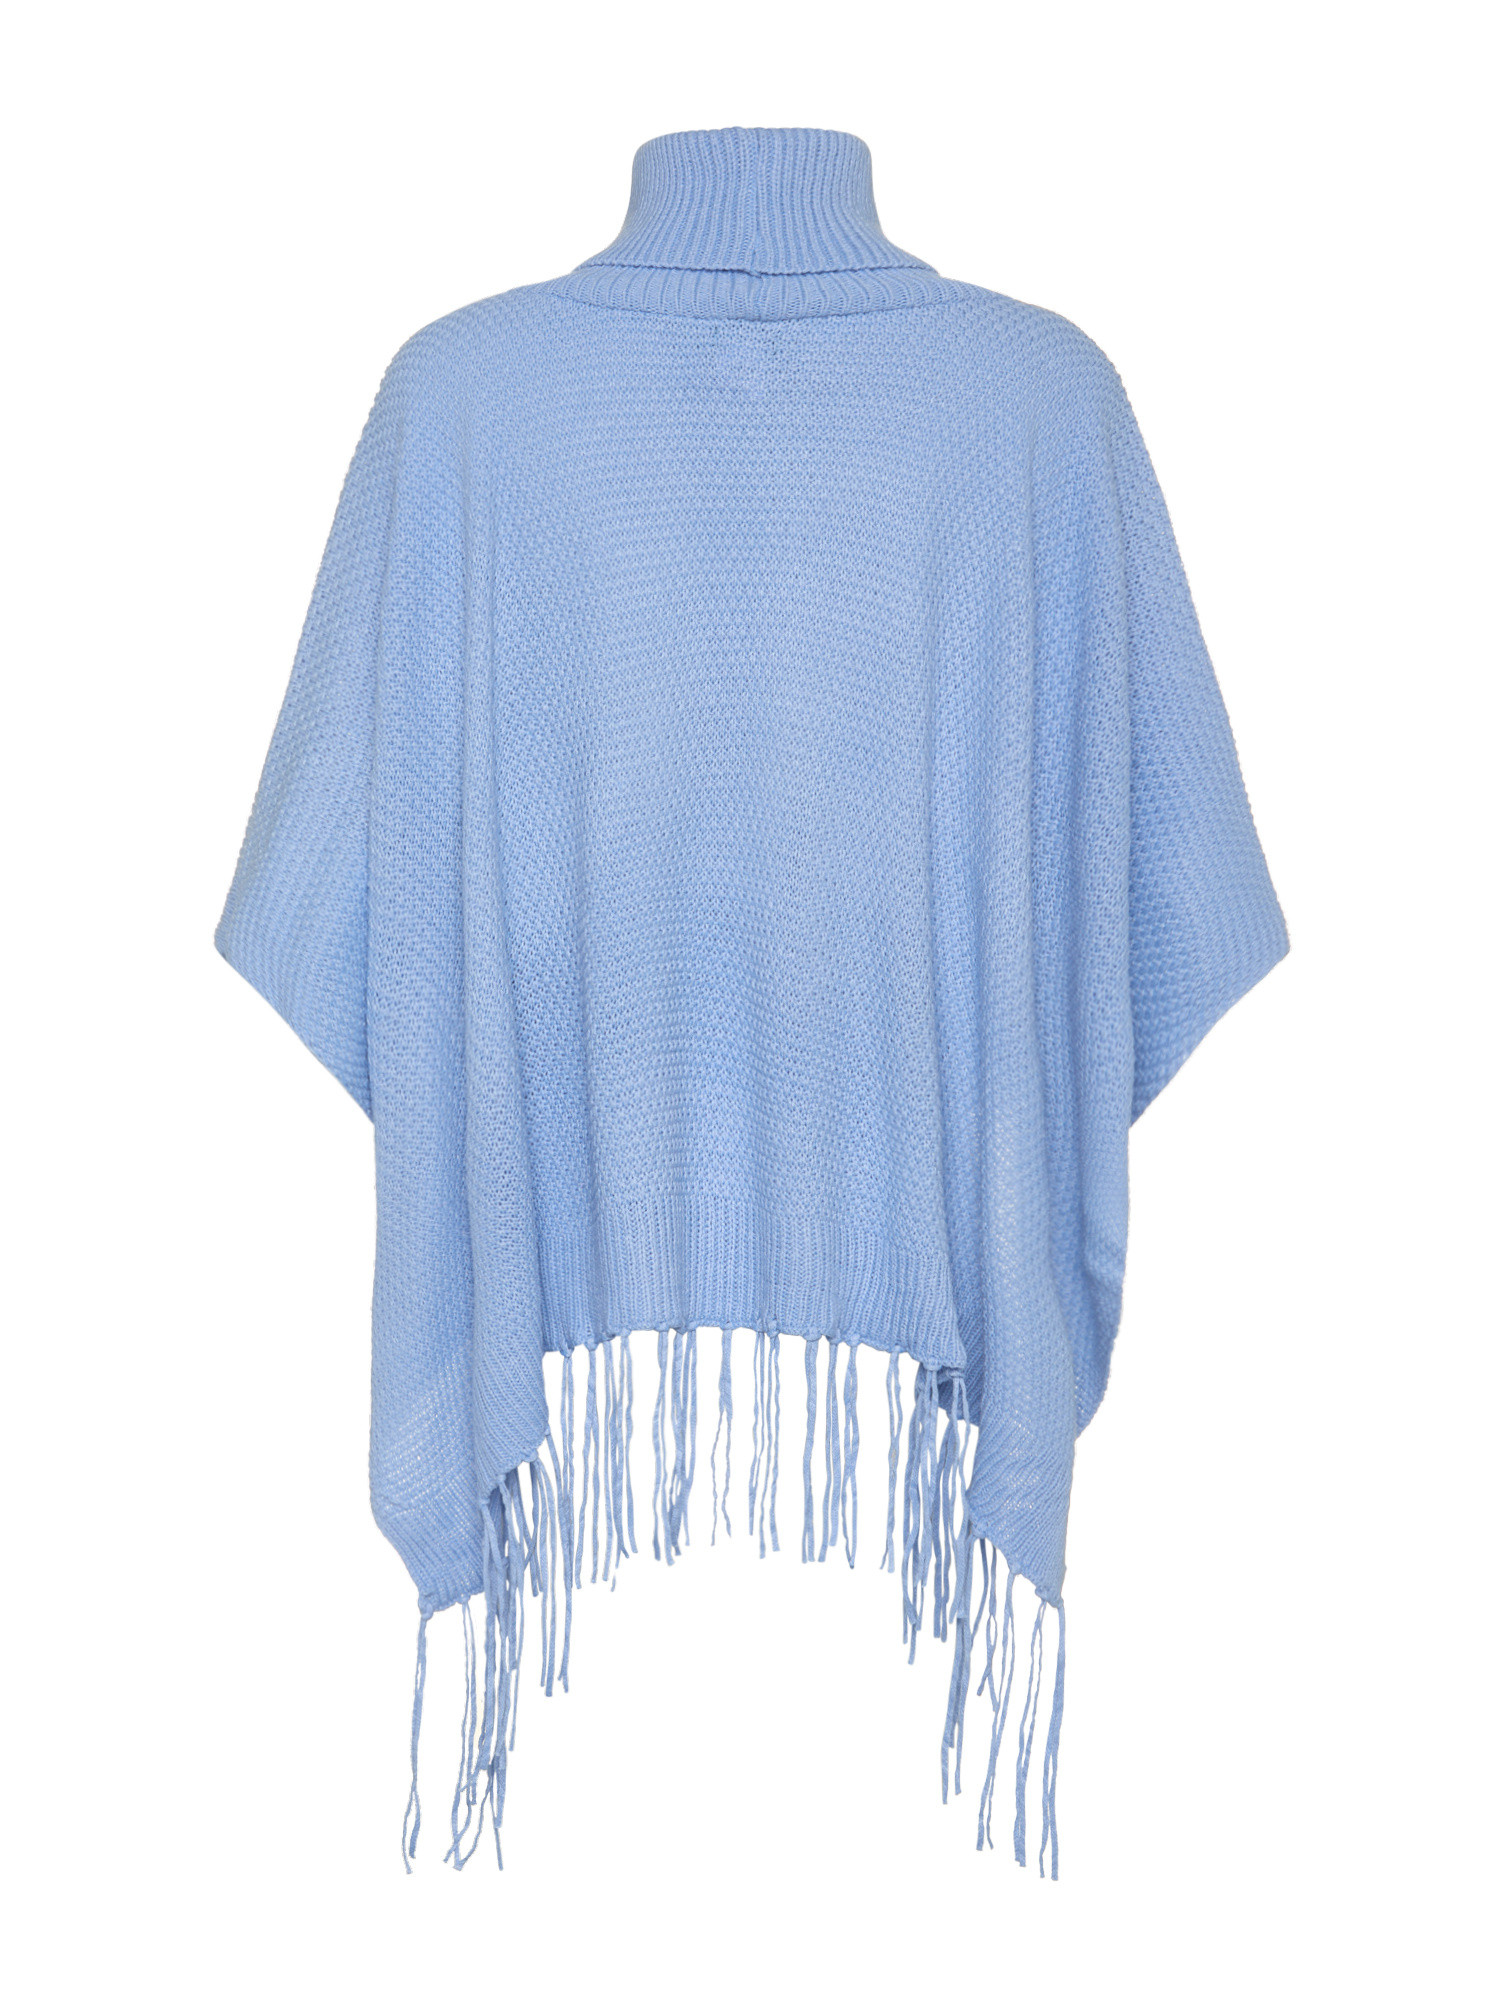 Koan - Knitted poncho, Light Blue, large image number 1